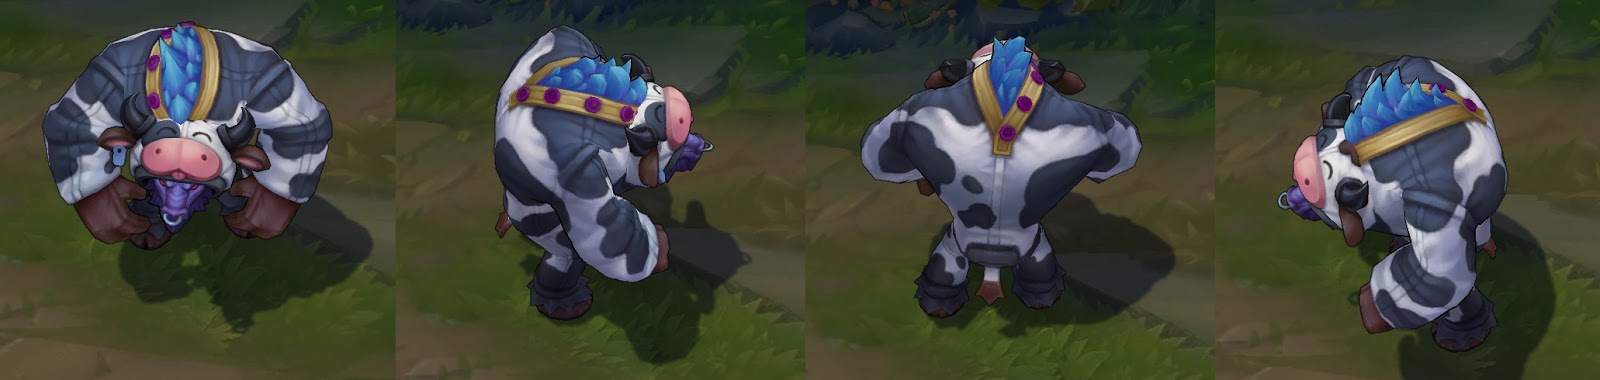 Moo Cow Alistar skin for league of legends ingame picture